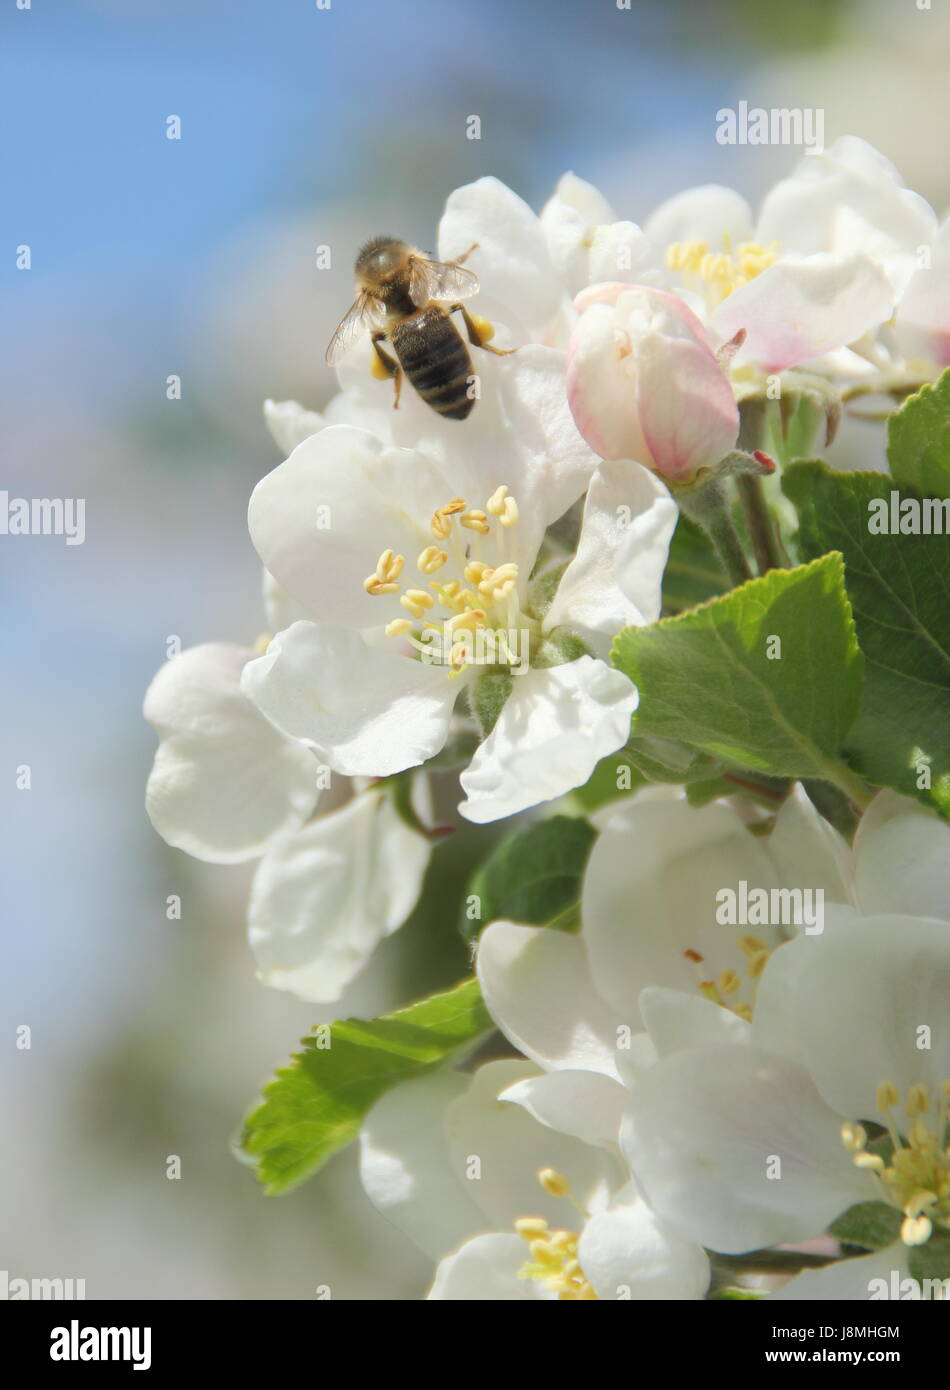 Honey bee (Apis Mellifera) landing on malus domestica 'Discovery' apple blossom in an English orchard on a sunny spring day, England, UK Stock Photo